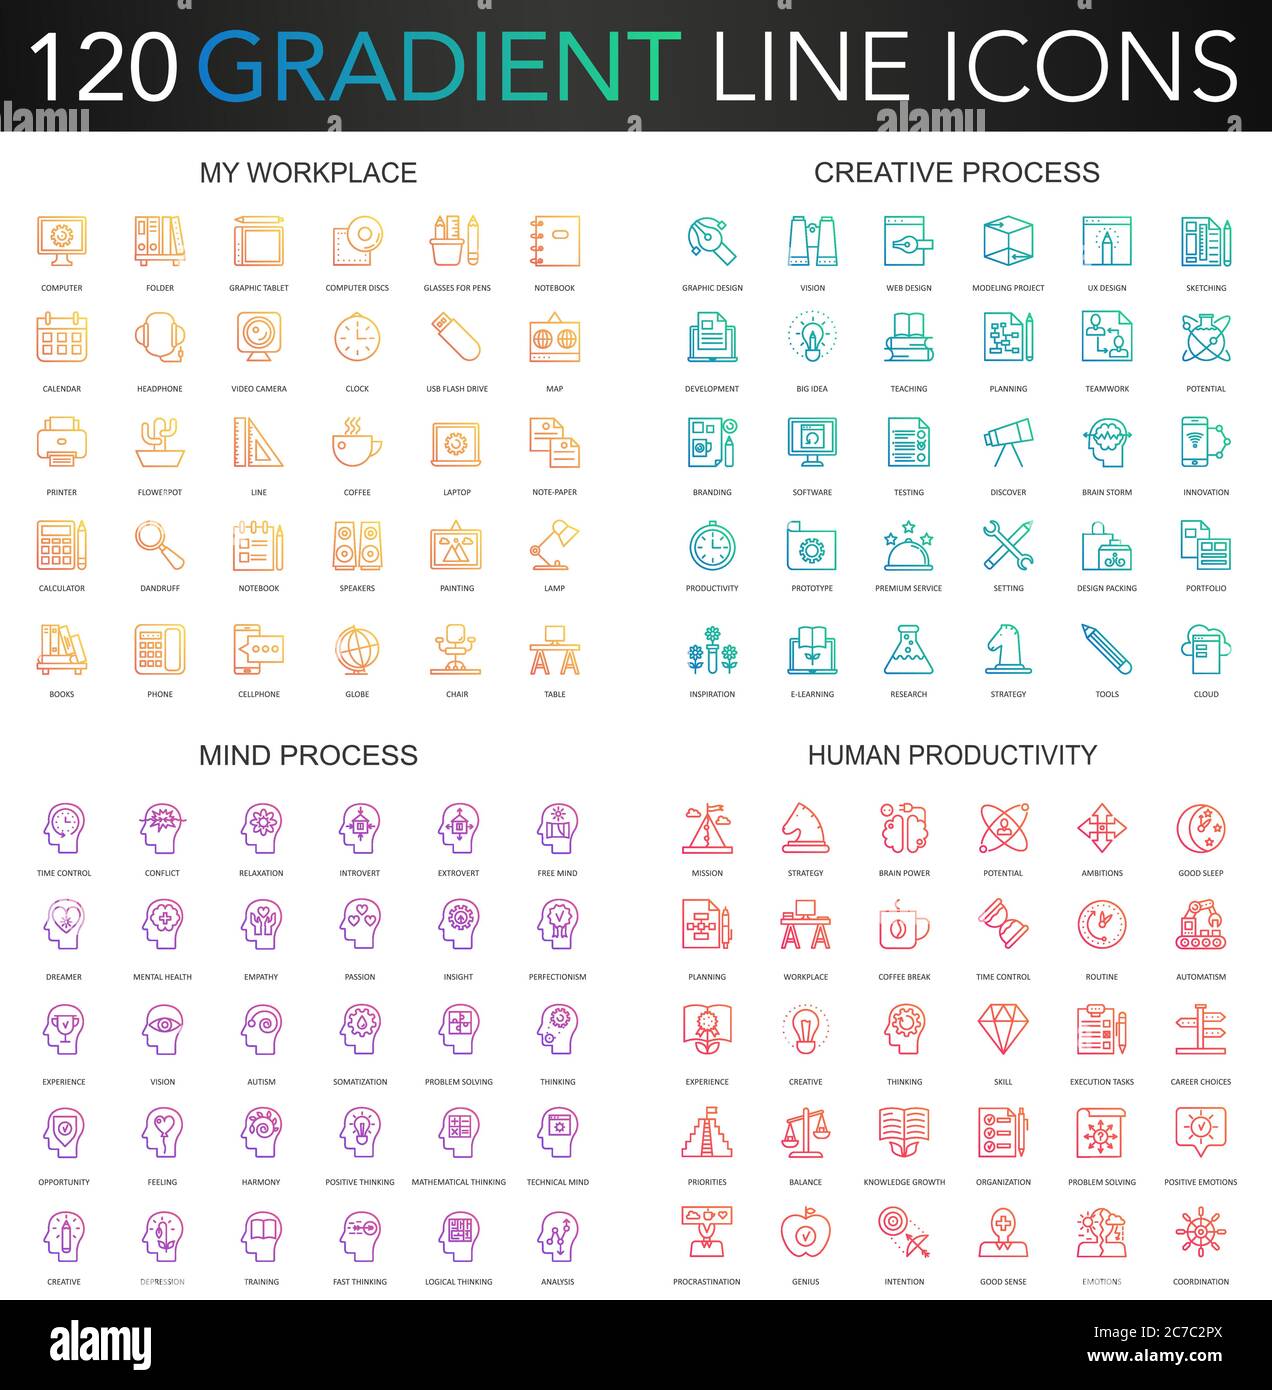 120 trendy gradient style thin line icons set of my workplace, creative process, human productivity, mental mind process isolated Stock Vector